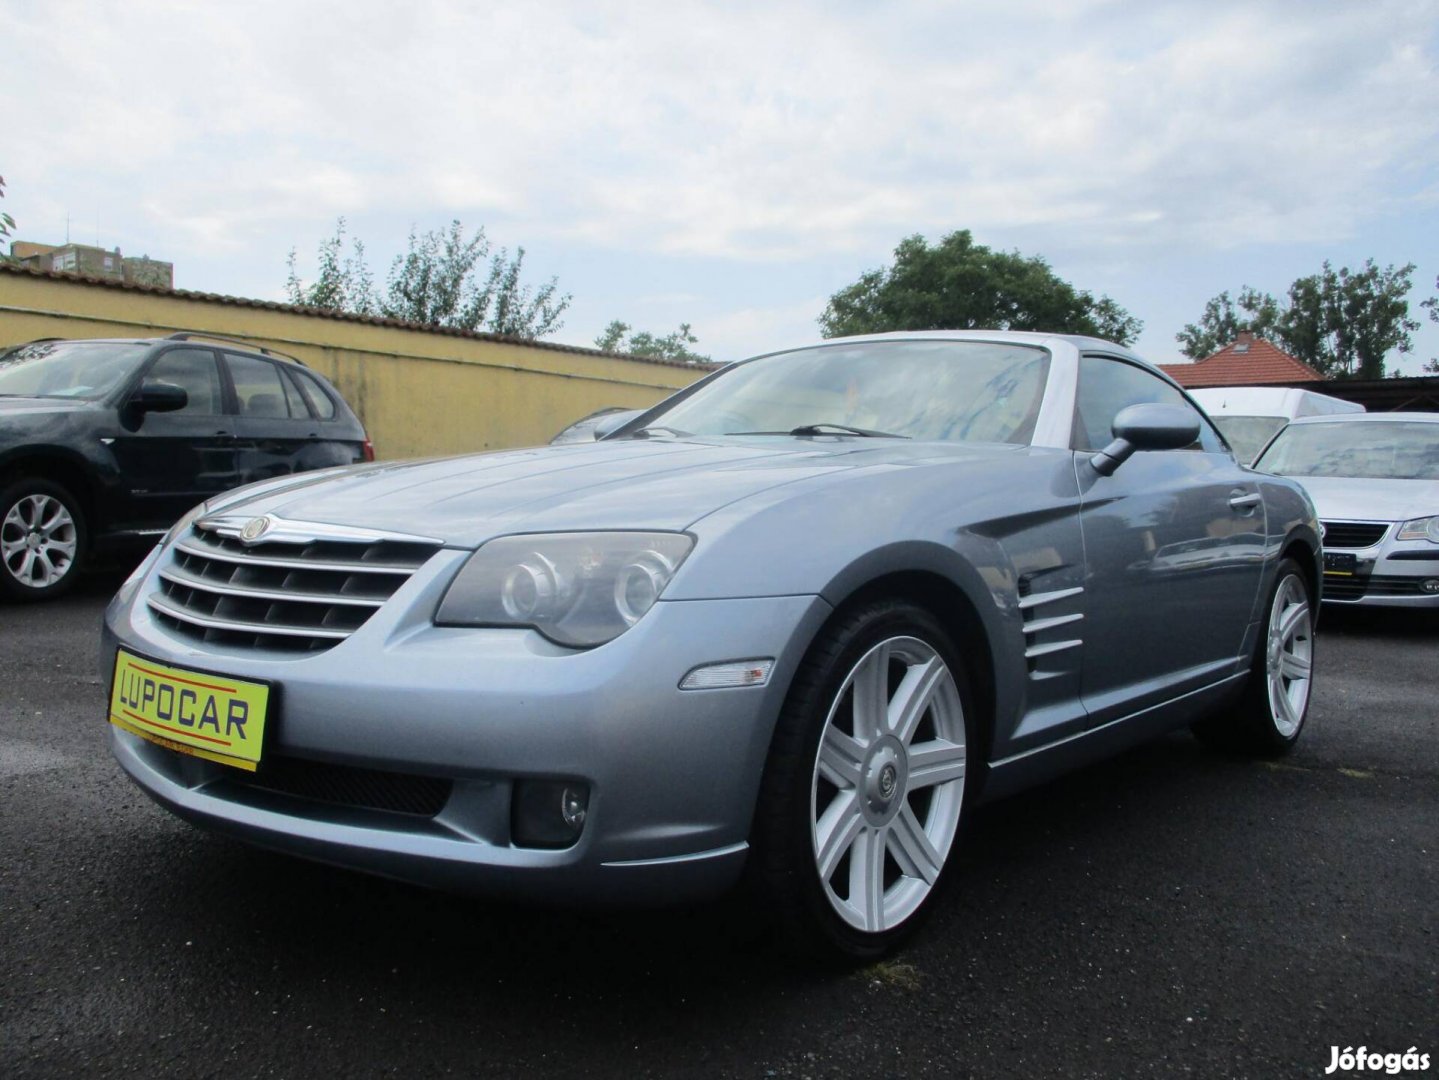 Chrysler Crossfire Coupe 3.2 Limited (Automata)